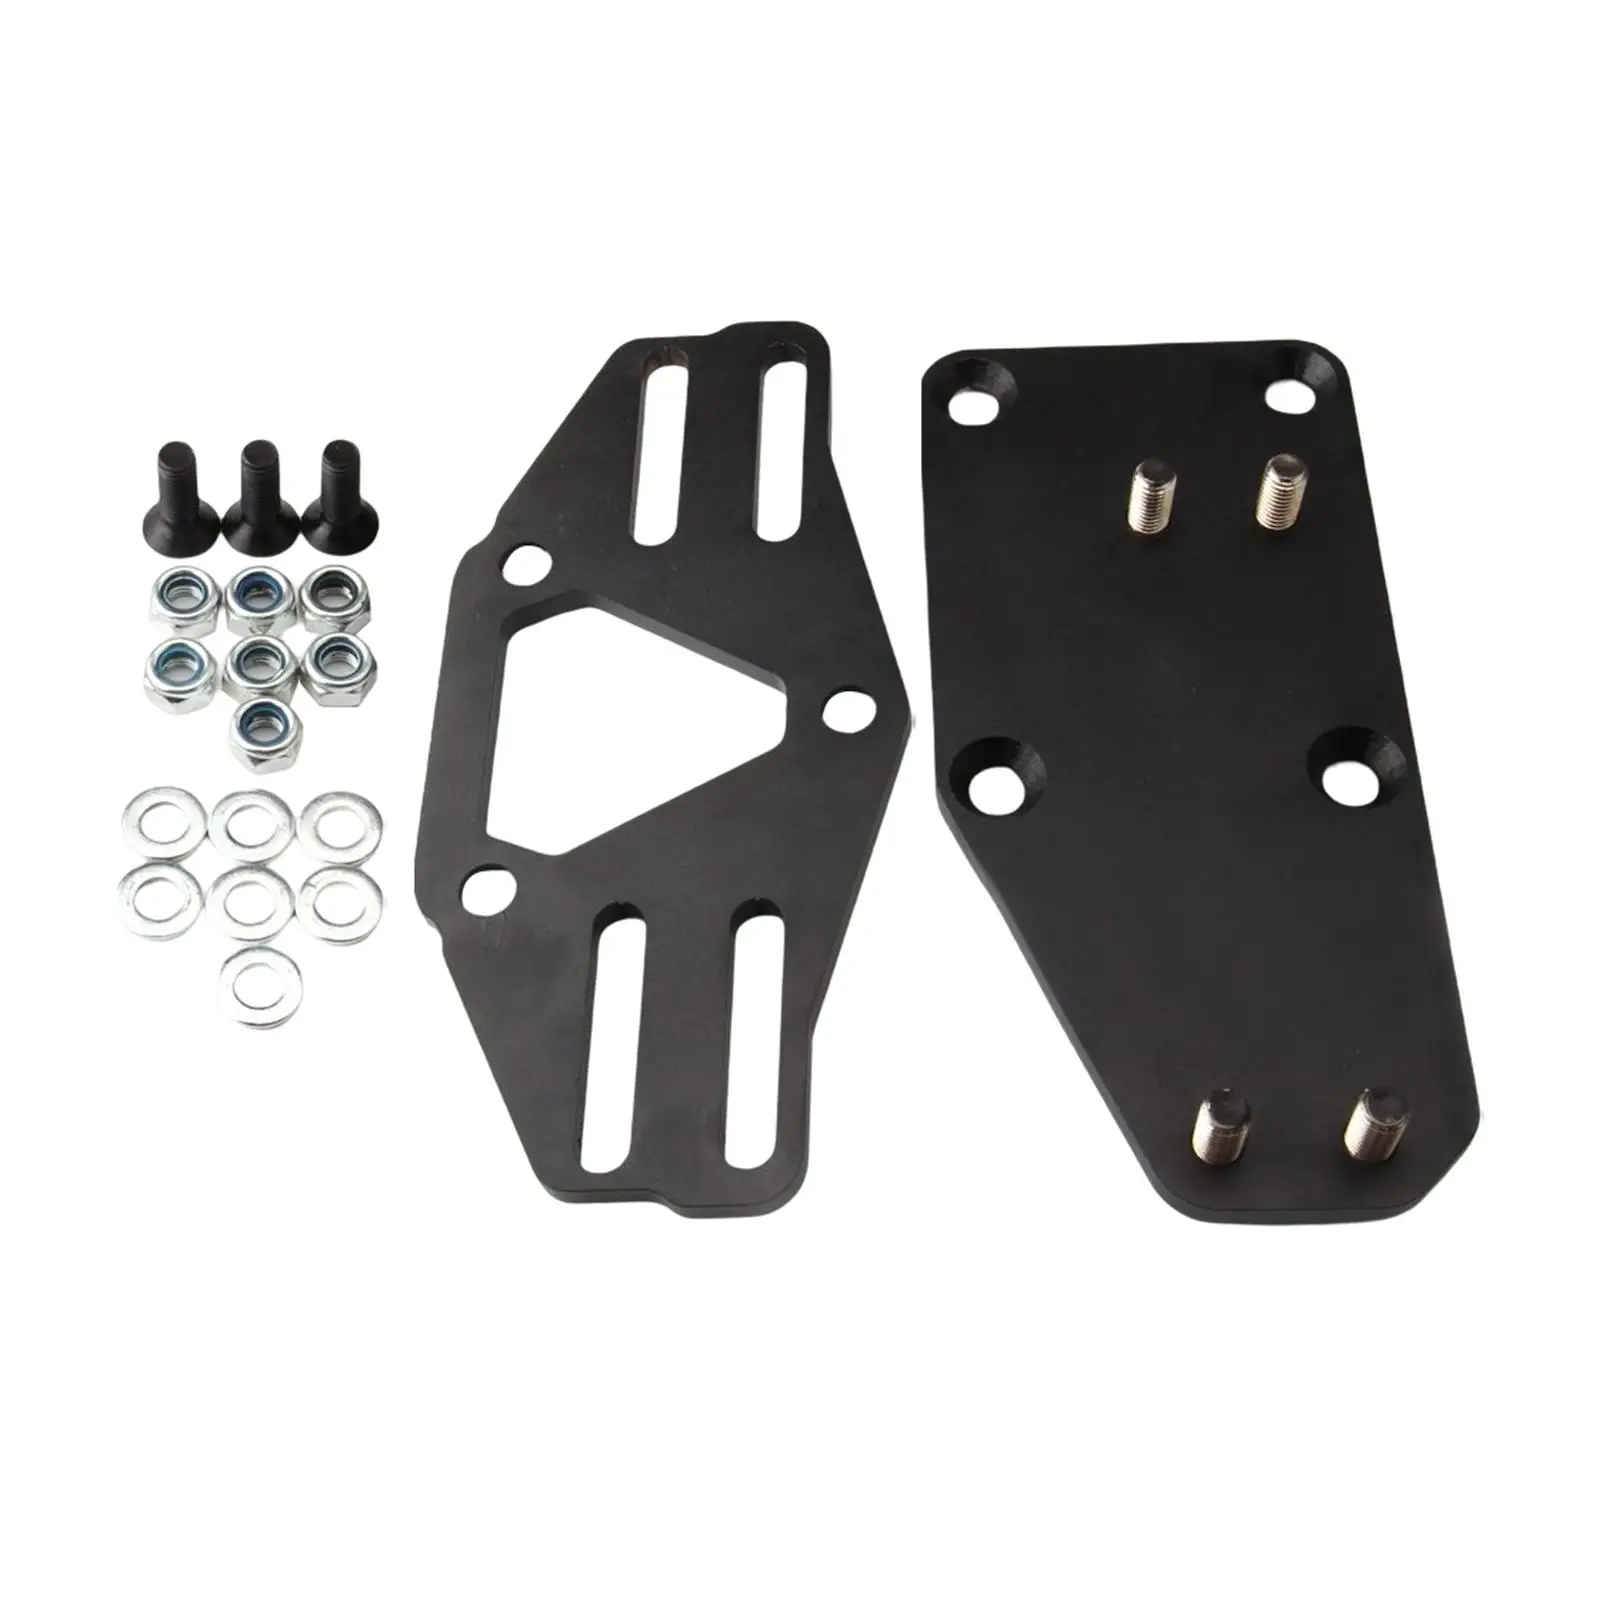 Engine Mount Adapter Swap Motor Mount Adapter Plate Fit for LS Cars & Trucks 58-72 Plates